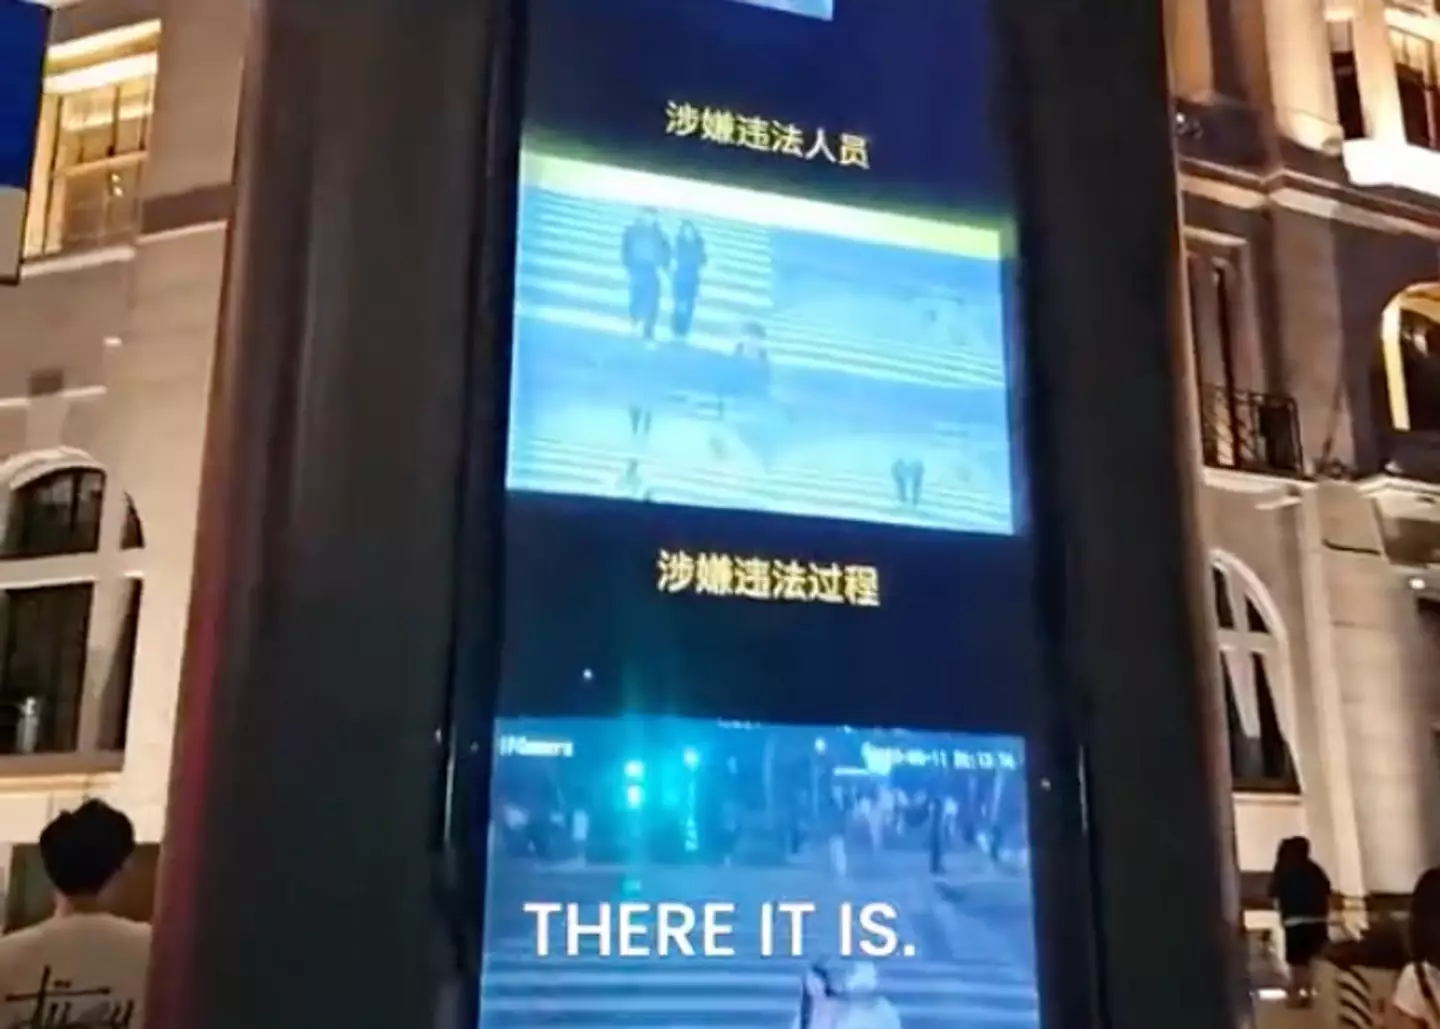 A Chinese surveillance system publicly shames people who are spotted jaywalking in the street.